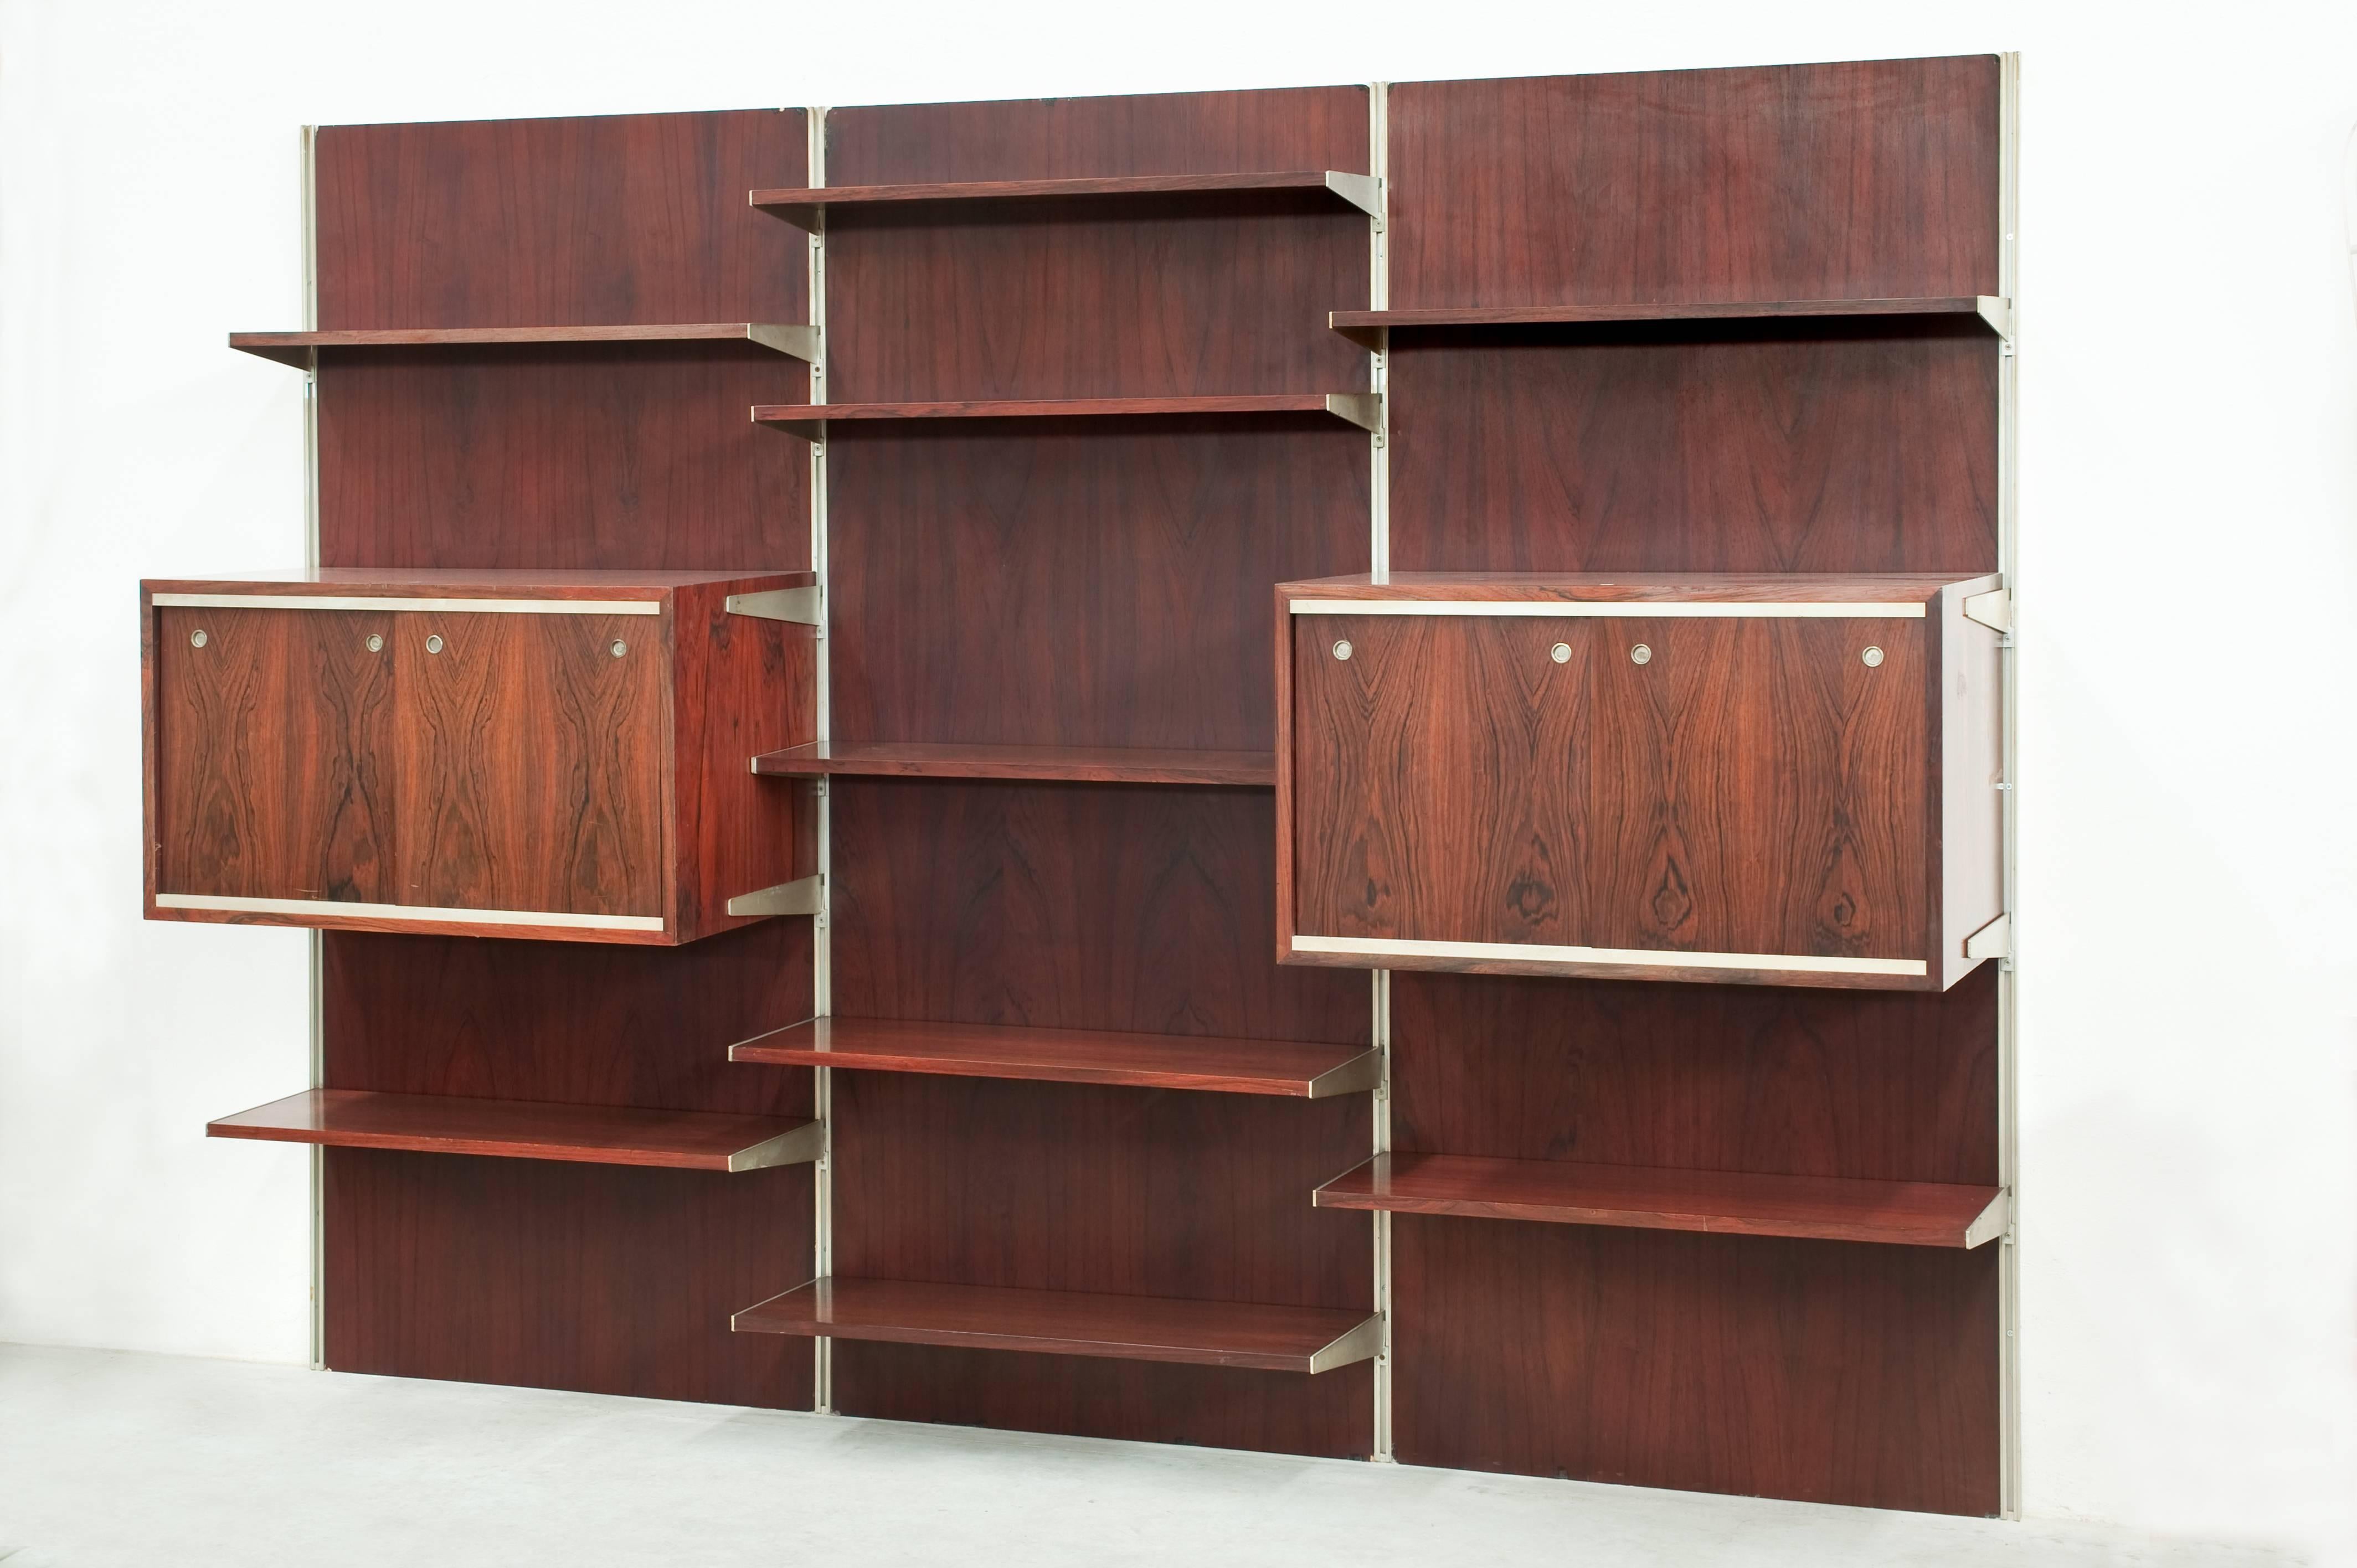 Very nice bookcase attributed to Kai Kristiansen.
Two cabinets with 2 doors each and 9 adjustable shelves.